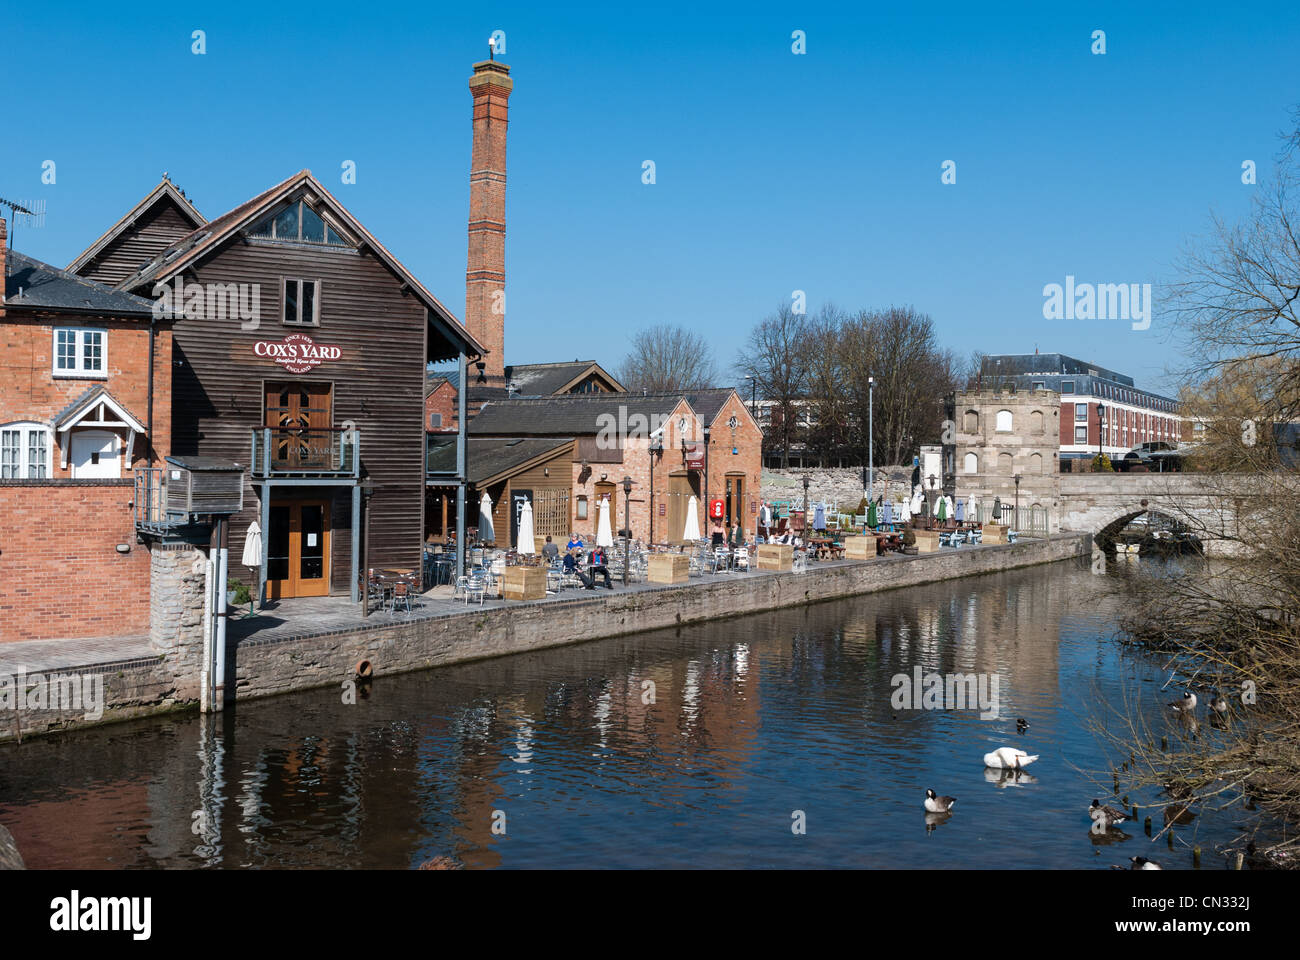 Cafes and restaurants in Cox's Yard in Stratford-upon-Avon, Warwickshire, UK Stock Photo